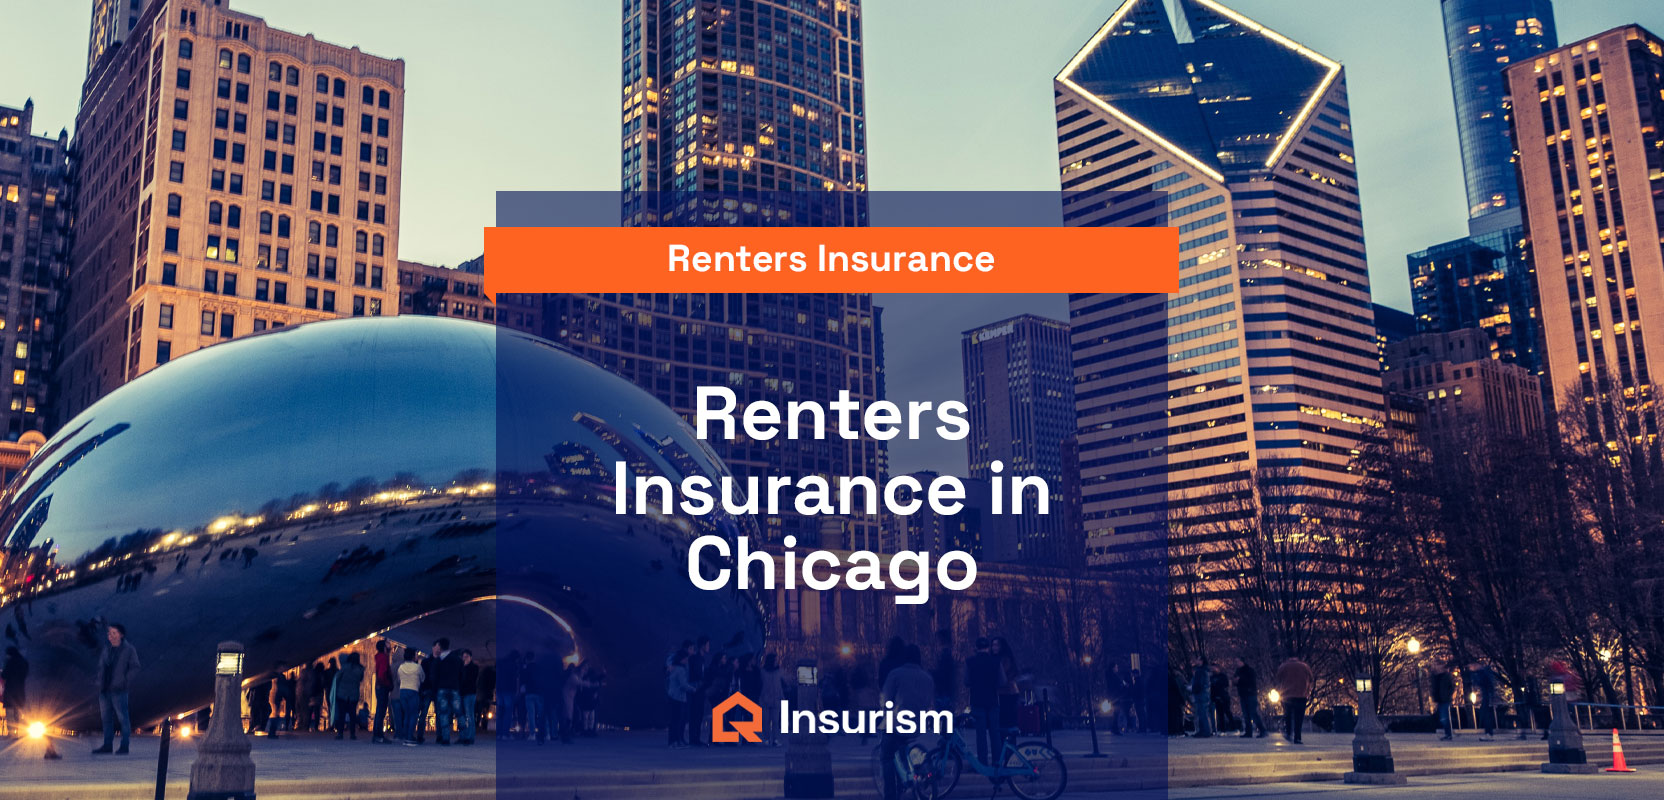 Renters insurance in Chicago